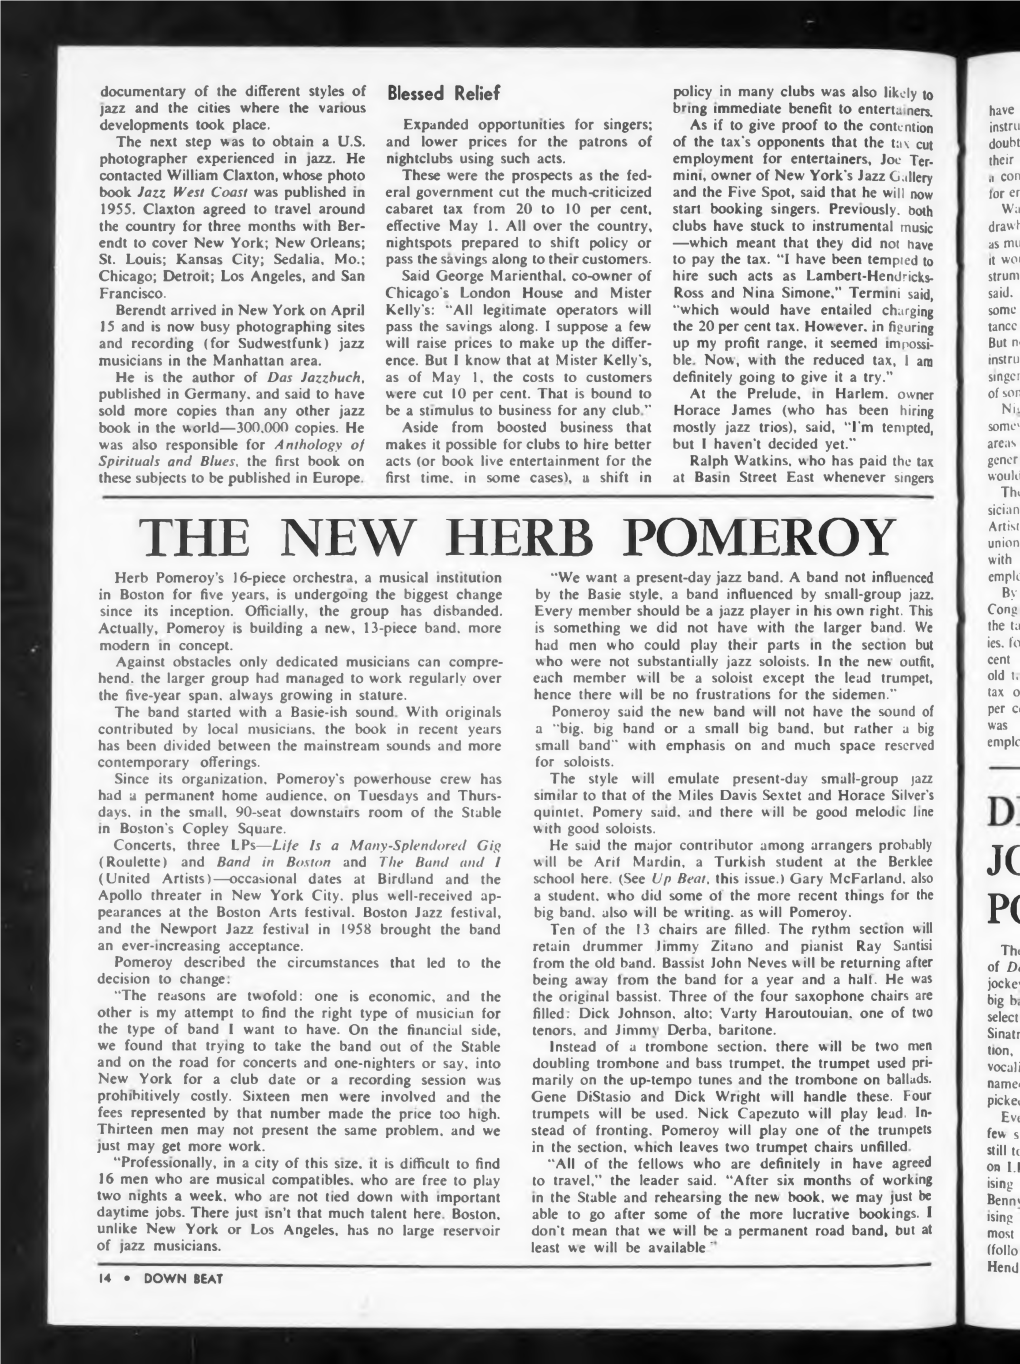 THE NEW HERB POMEROY Union with Herb Pomeroy’S 16-Piece Orchestra, a Musical Institution “We Want a Present-Day Jazz Band